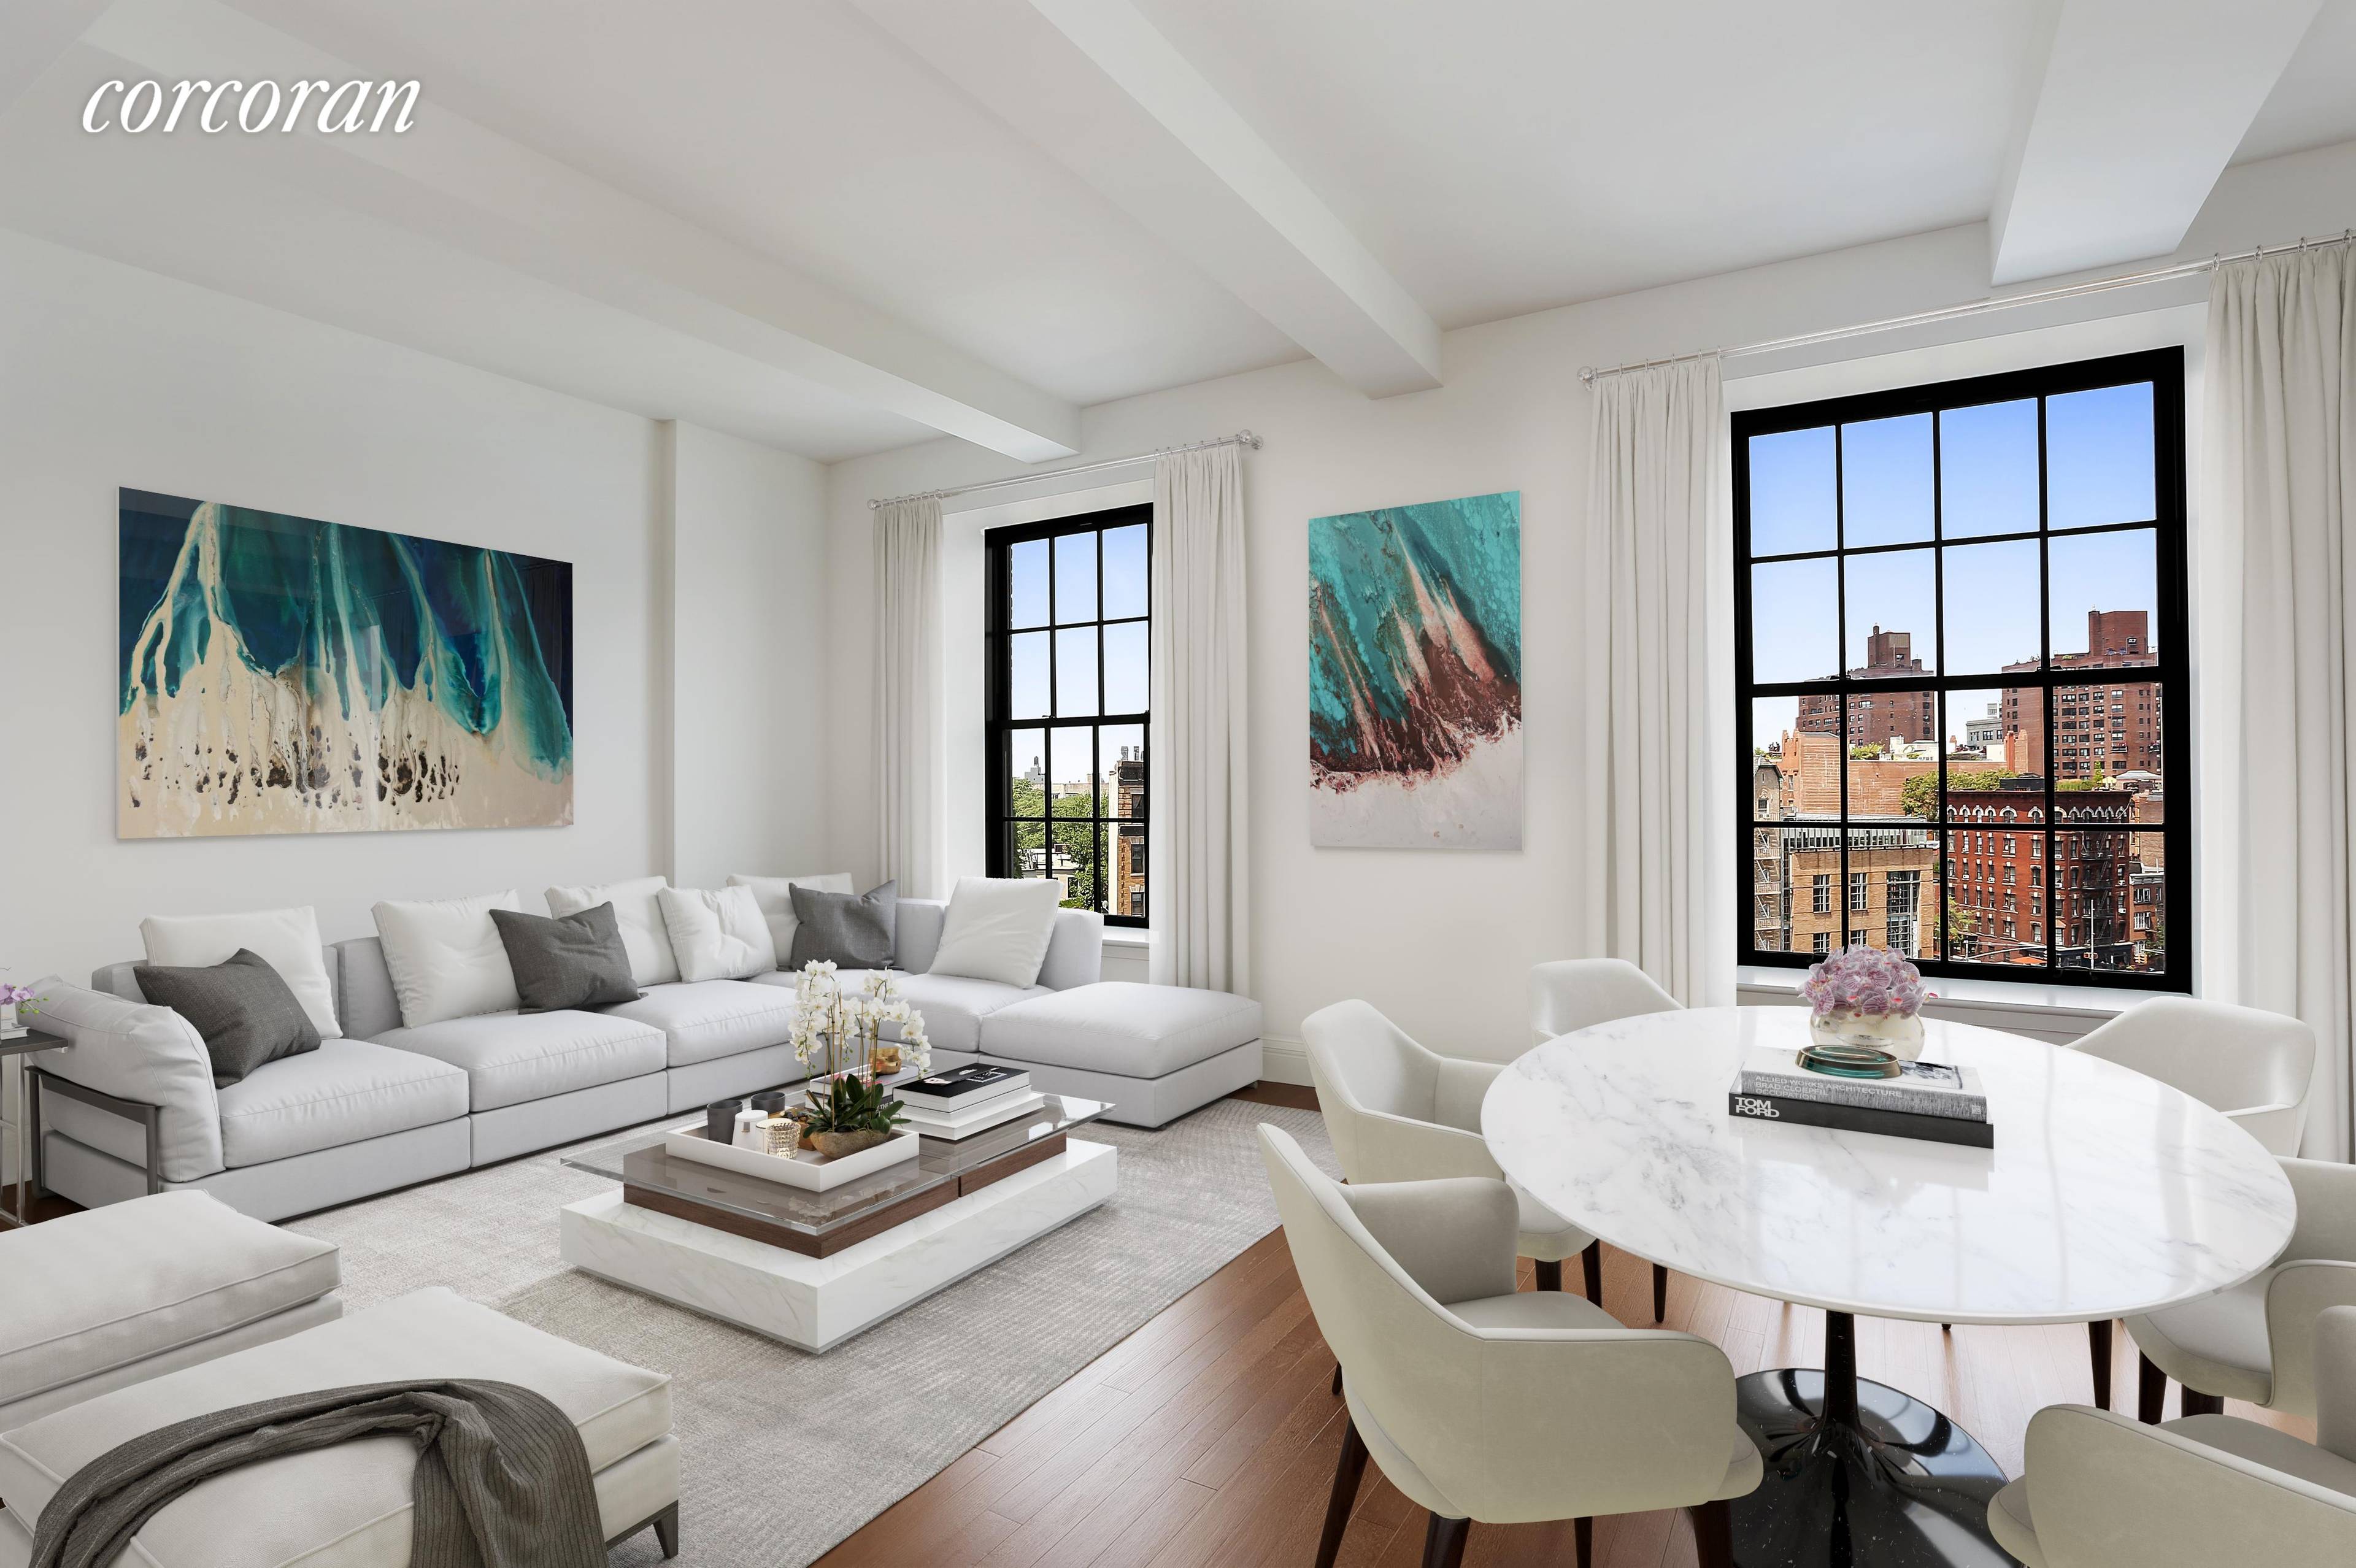 Located in the luxury condominium, The Greenwich Lane, this spectacular corner three bedroom, three and a half bathroom residence spans approximately 2, 452 gross square feet.